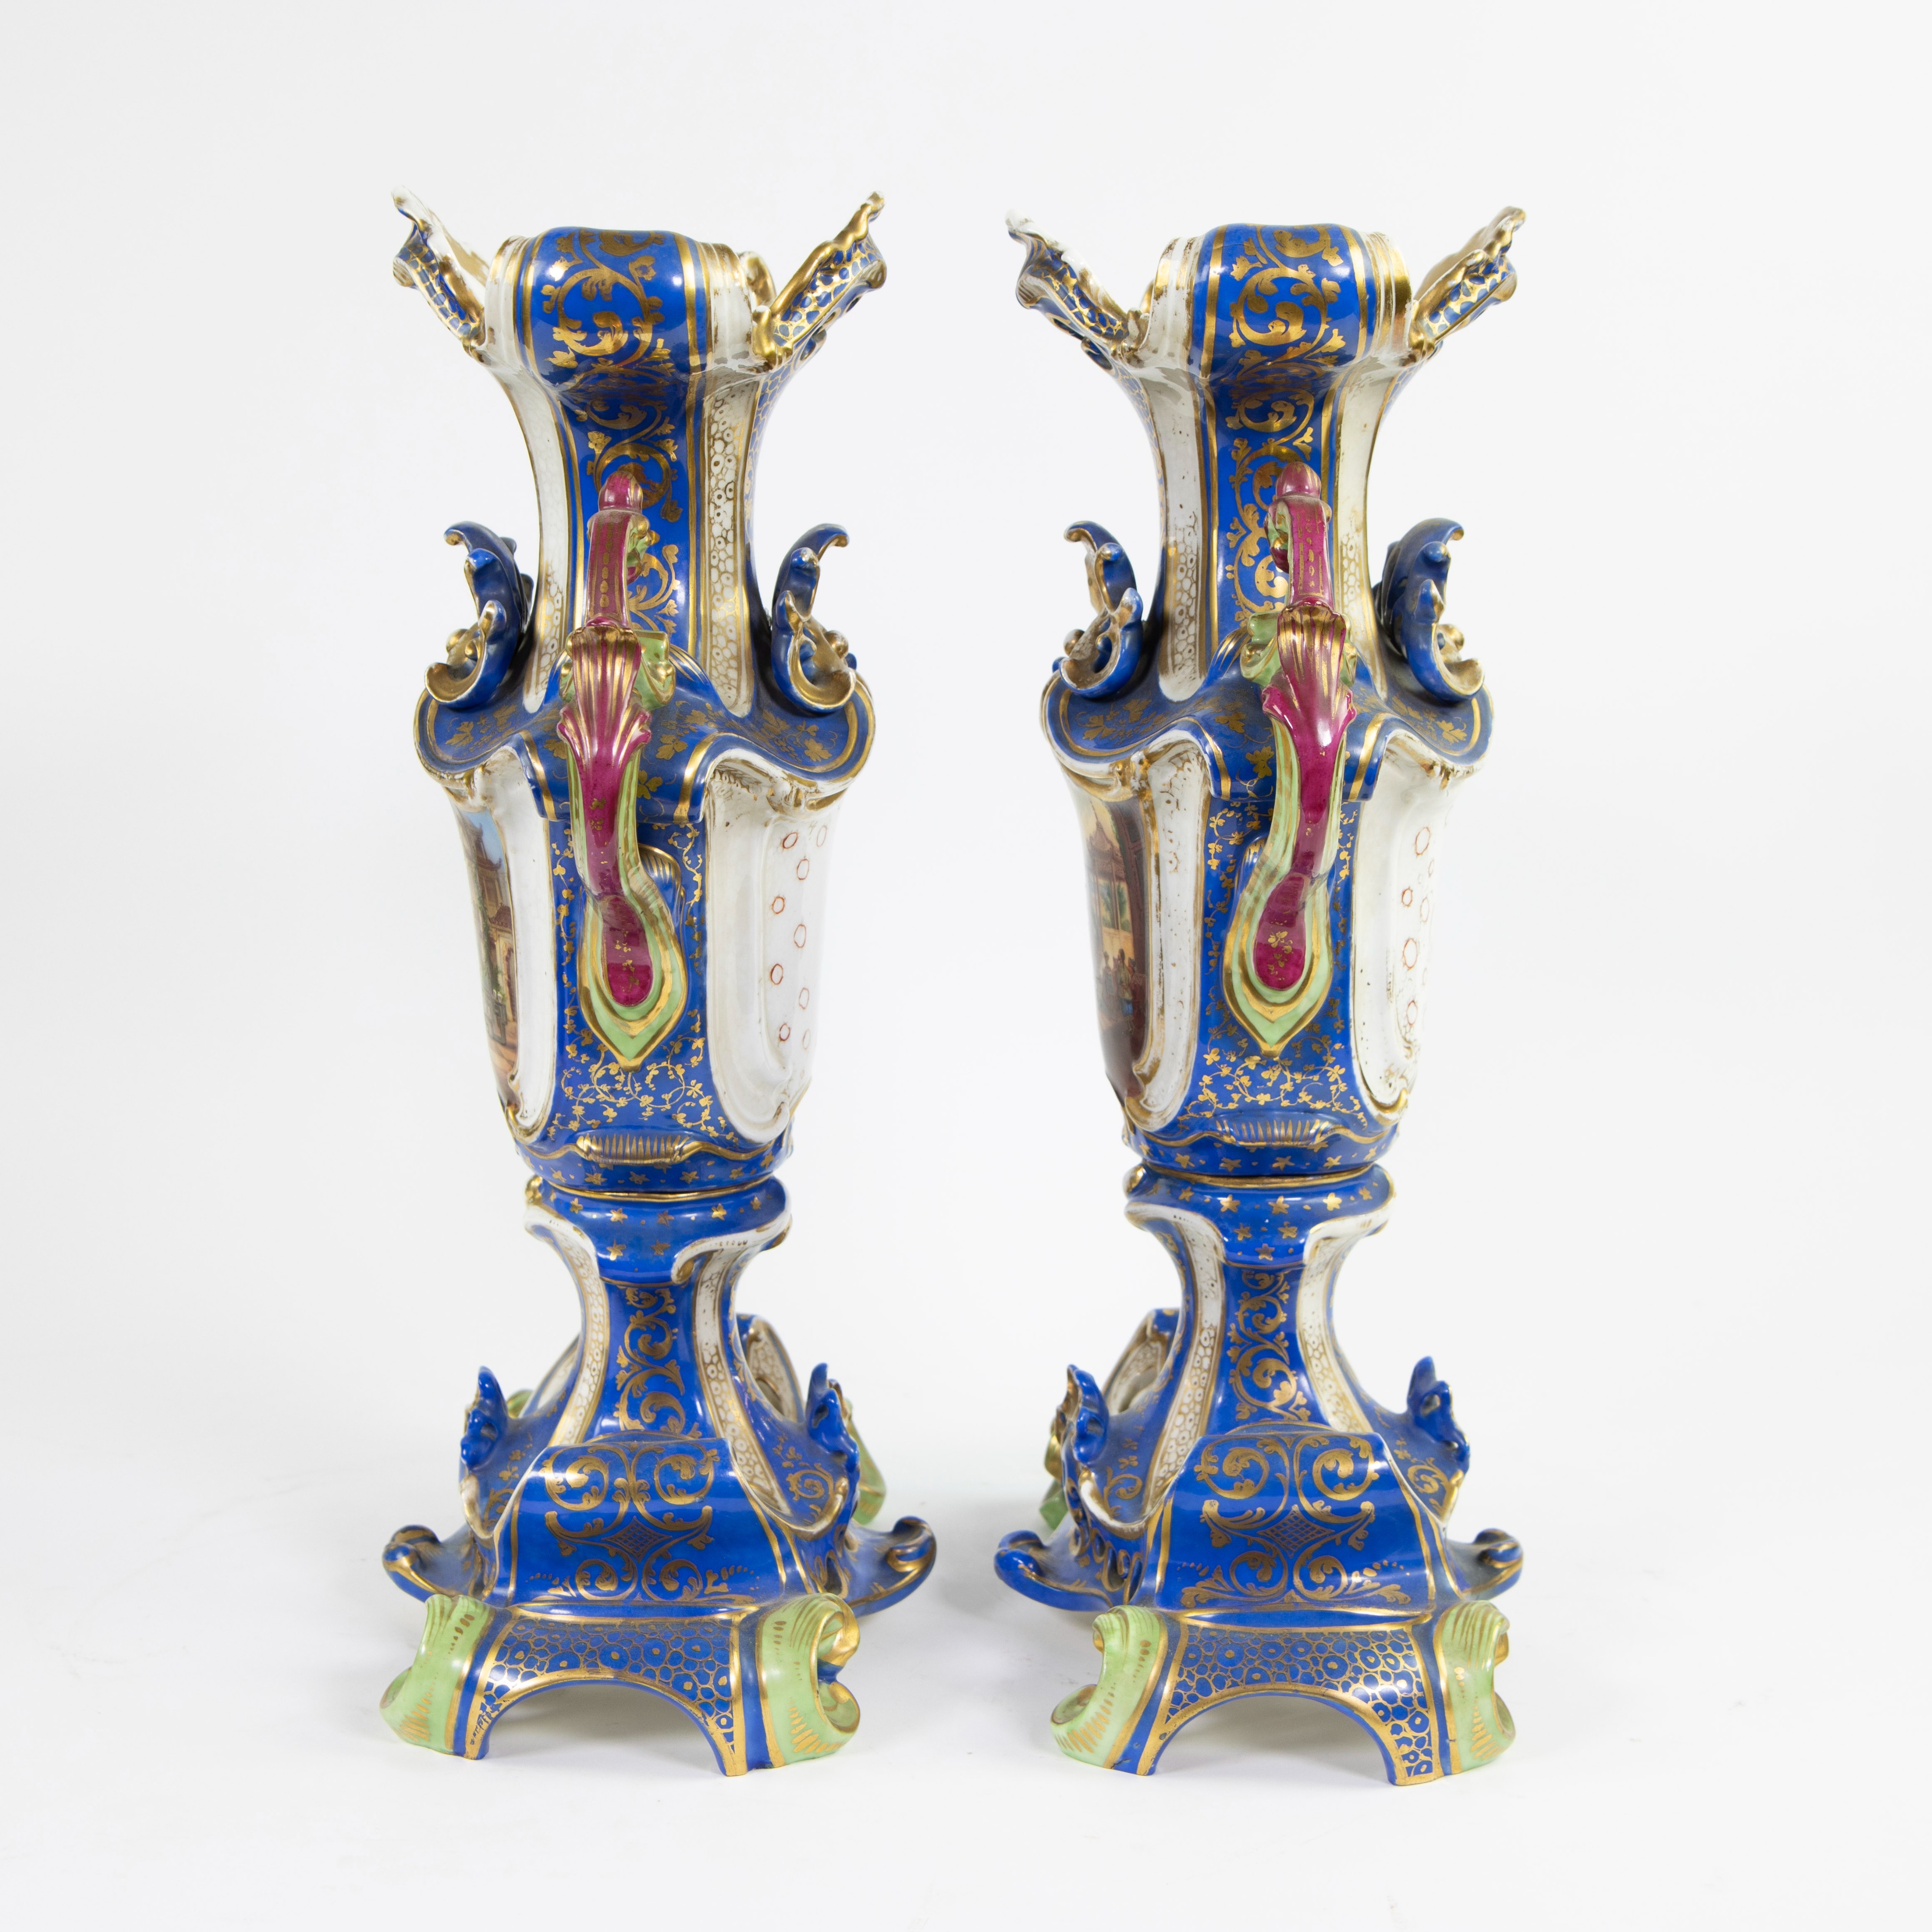 A pair of handpainted porcelain vases in the manner of Jacob Petit, Paris, France, ca 1850 - Image 2 of 5